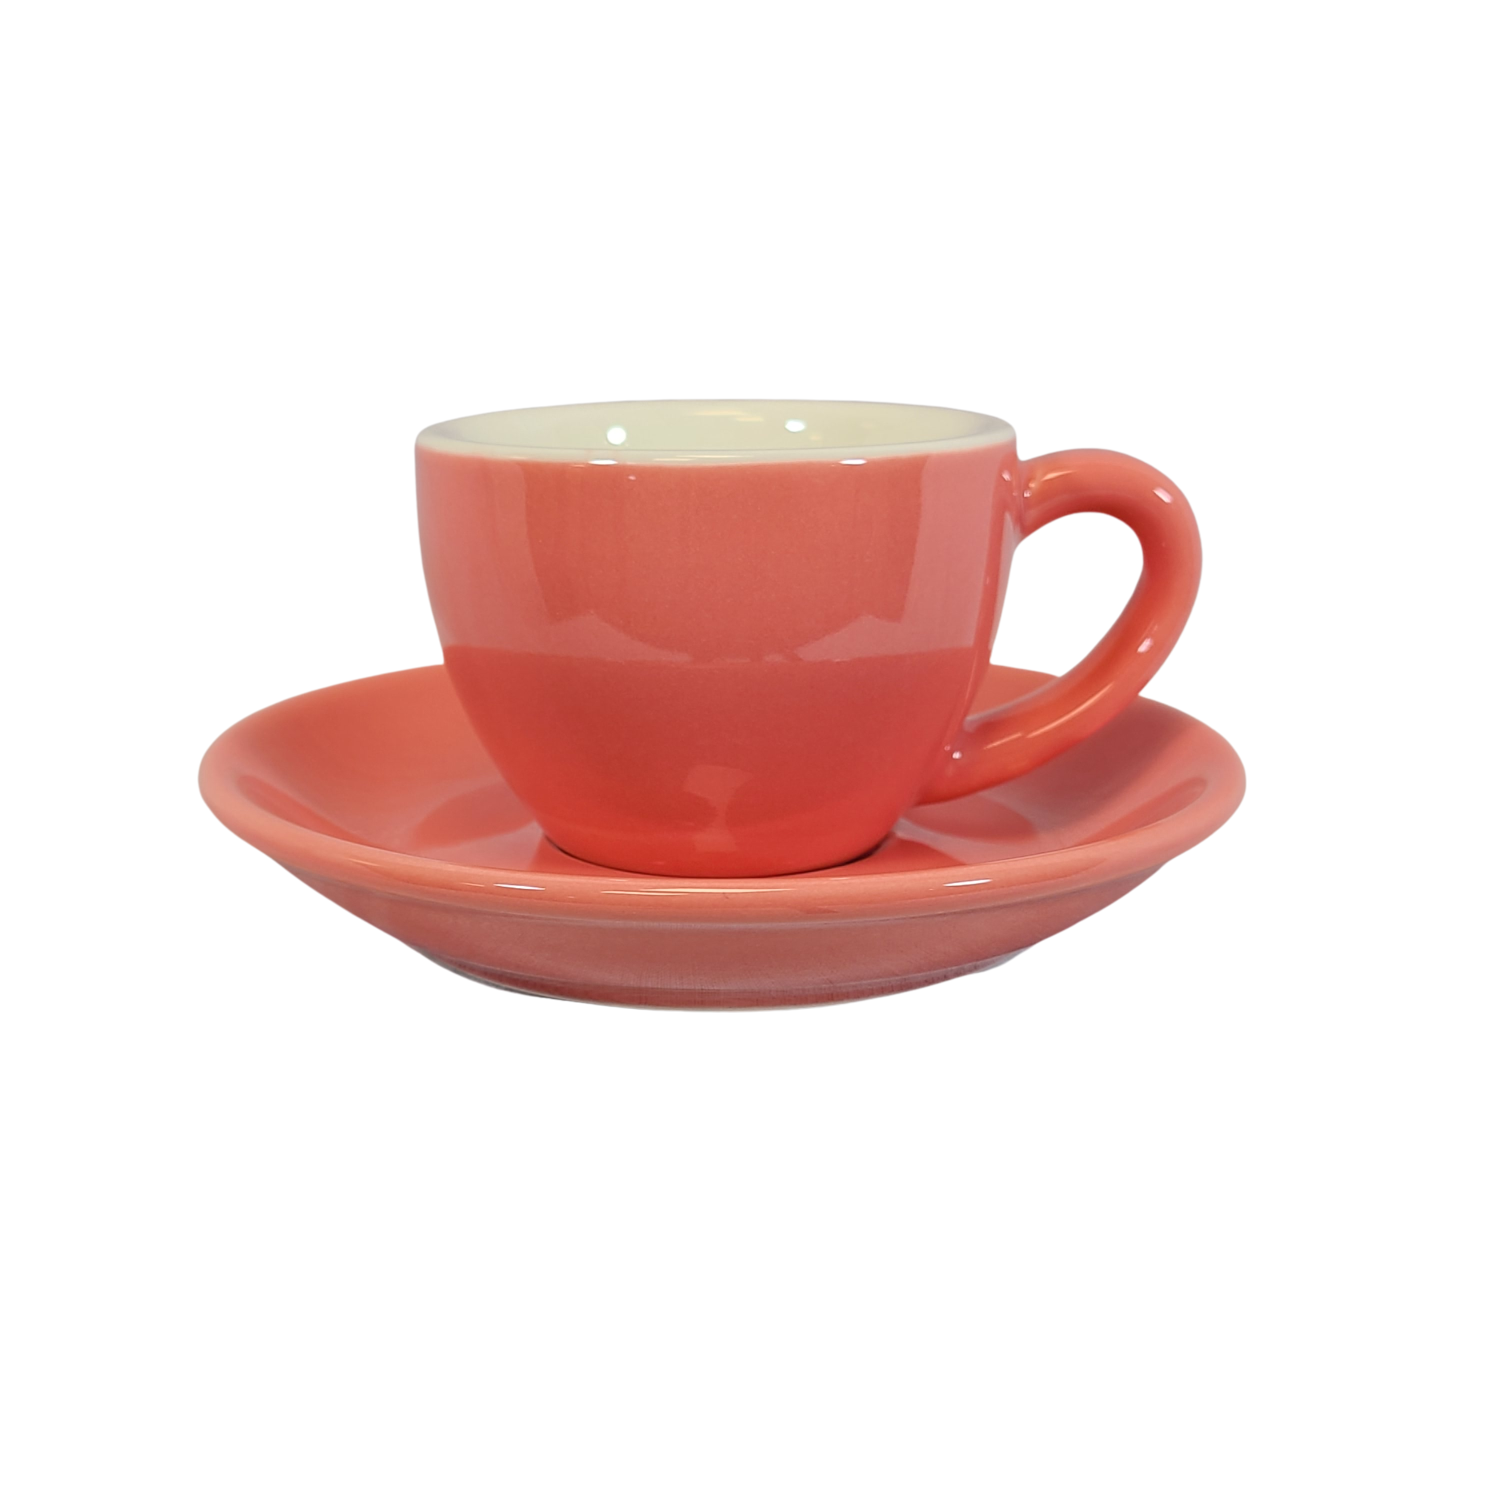 Coffee Addicts commercial ceramic cup with saucer in glossy pink espresso cup 2.7oz 80ml